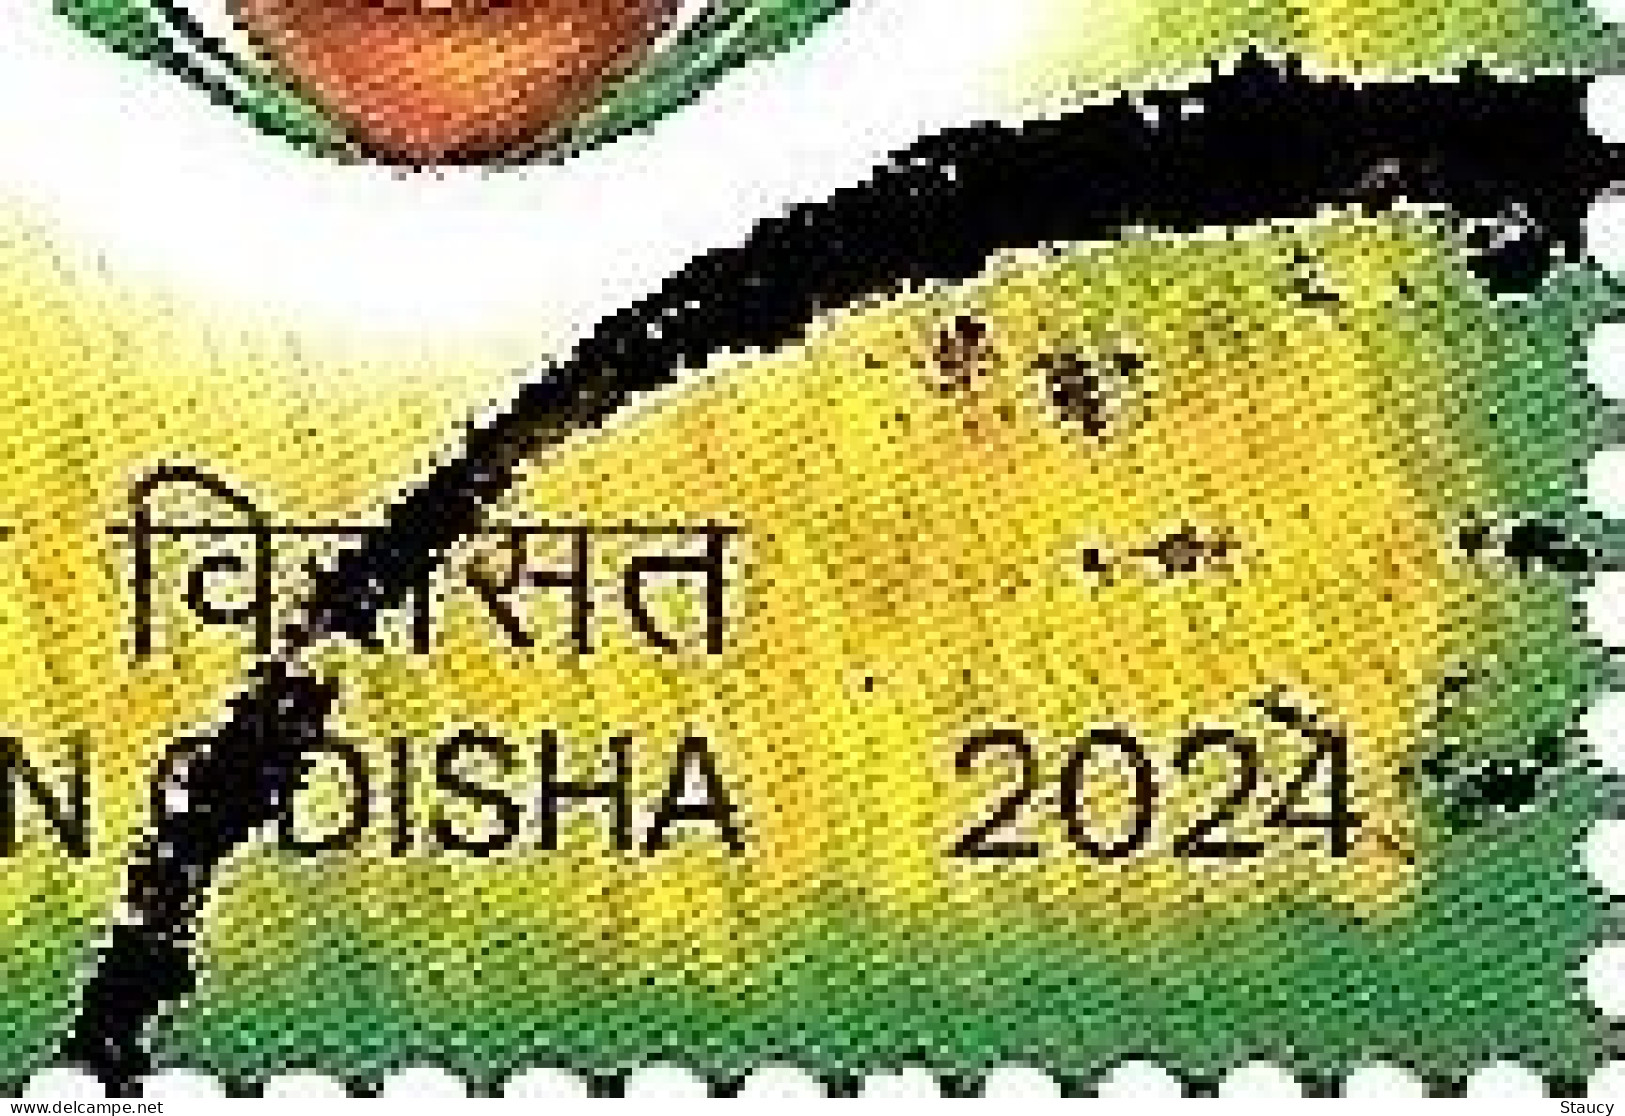 India 2024 CULTURAL HERITAGE OF WESTERN ODISHA 6v Stamp Set Handicraft Etc Used Or First Day Cancelled As Per Scan - Hinduism